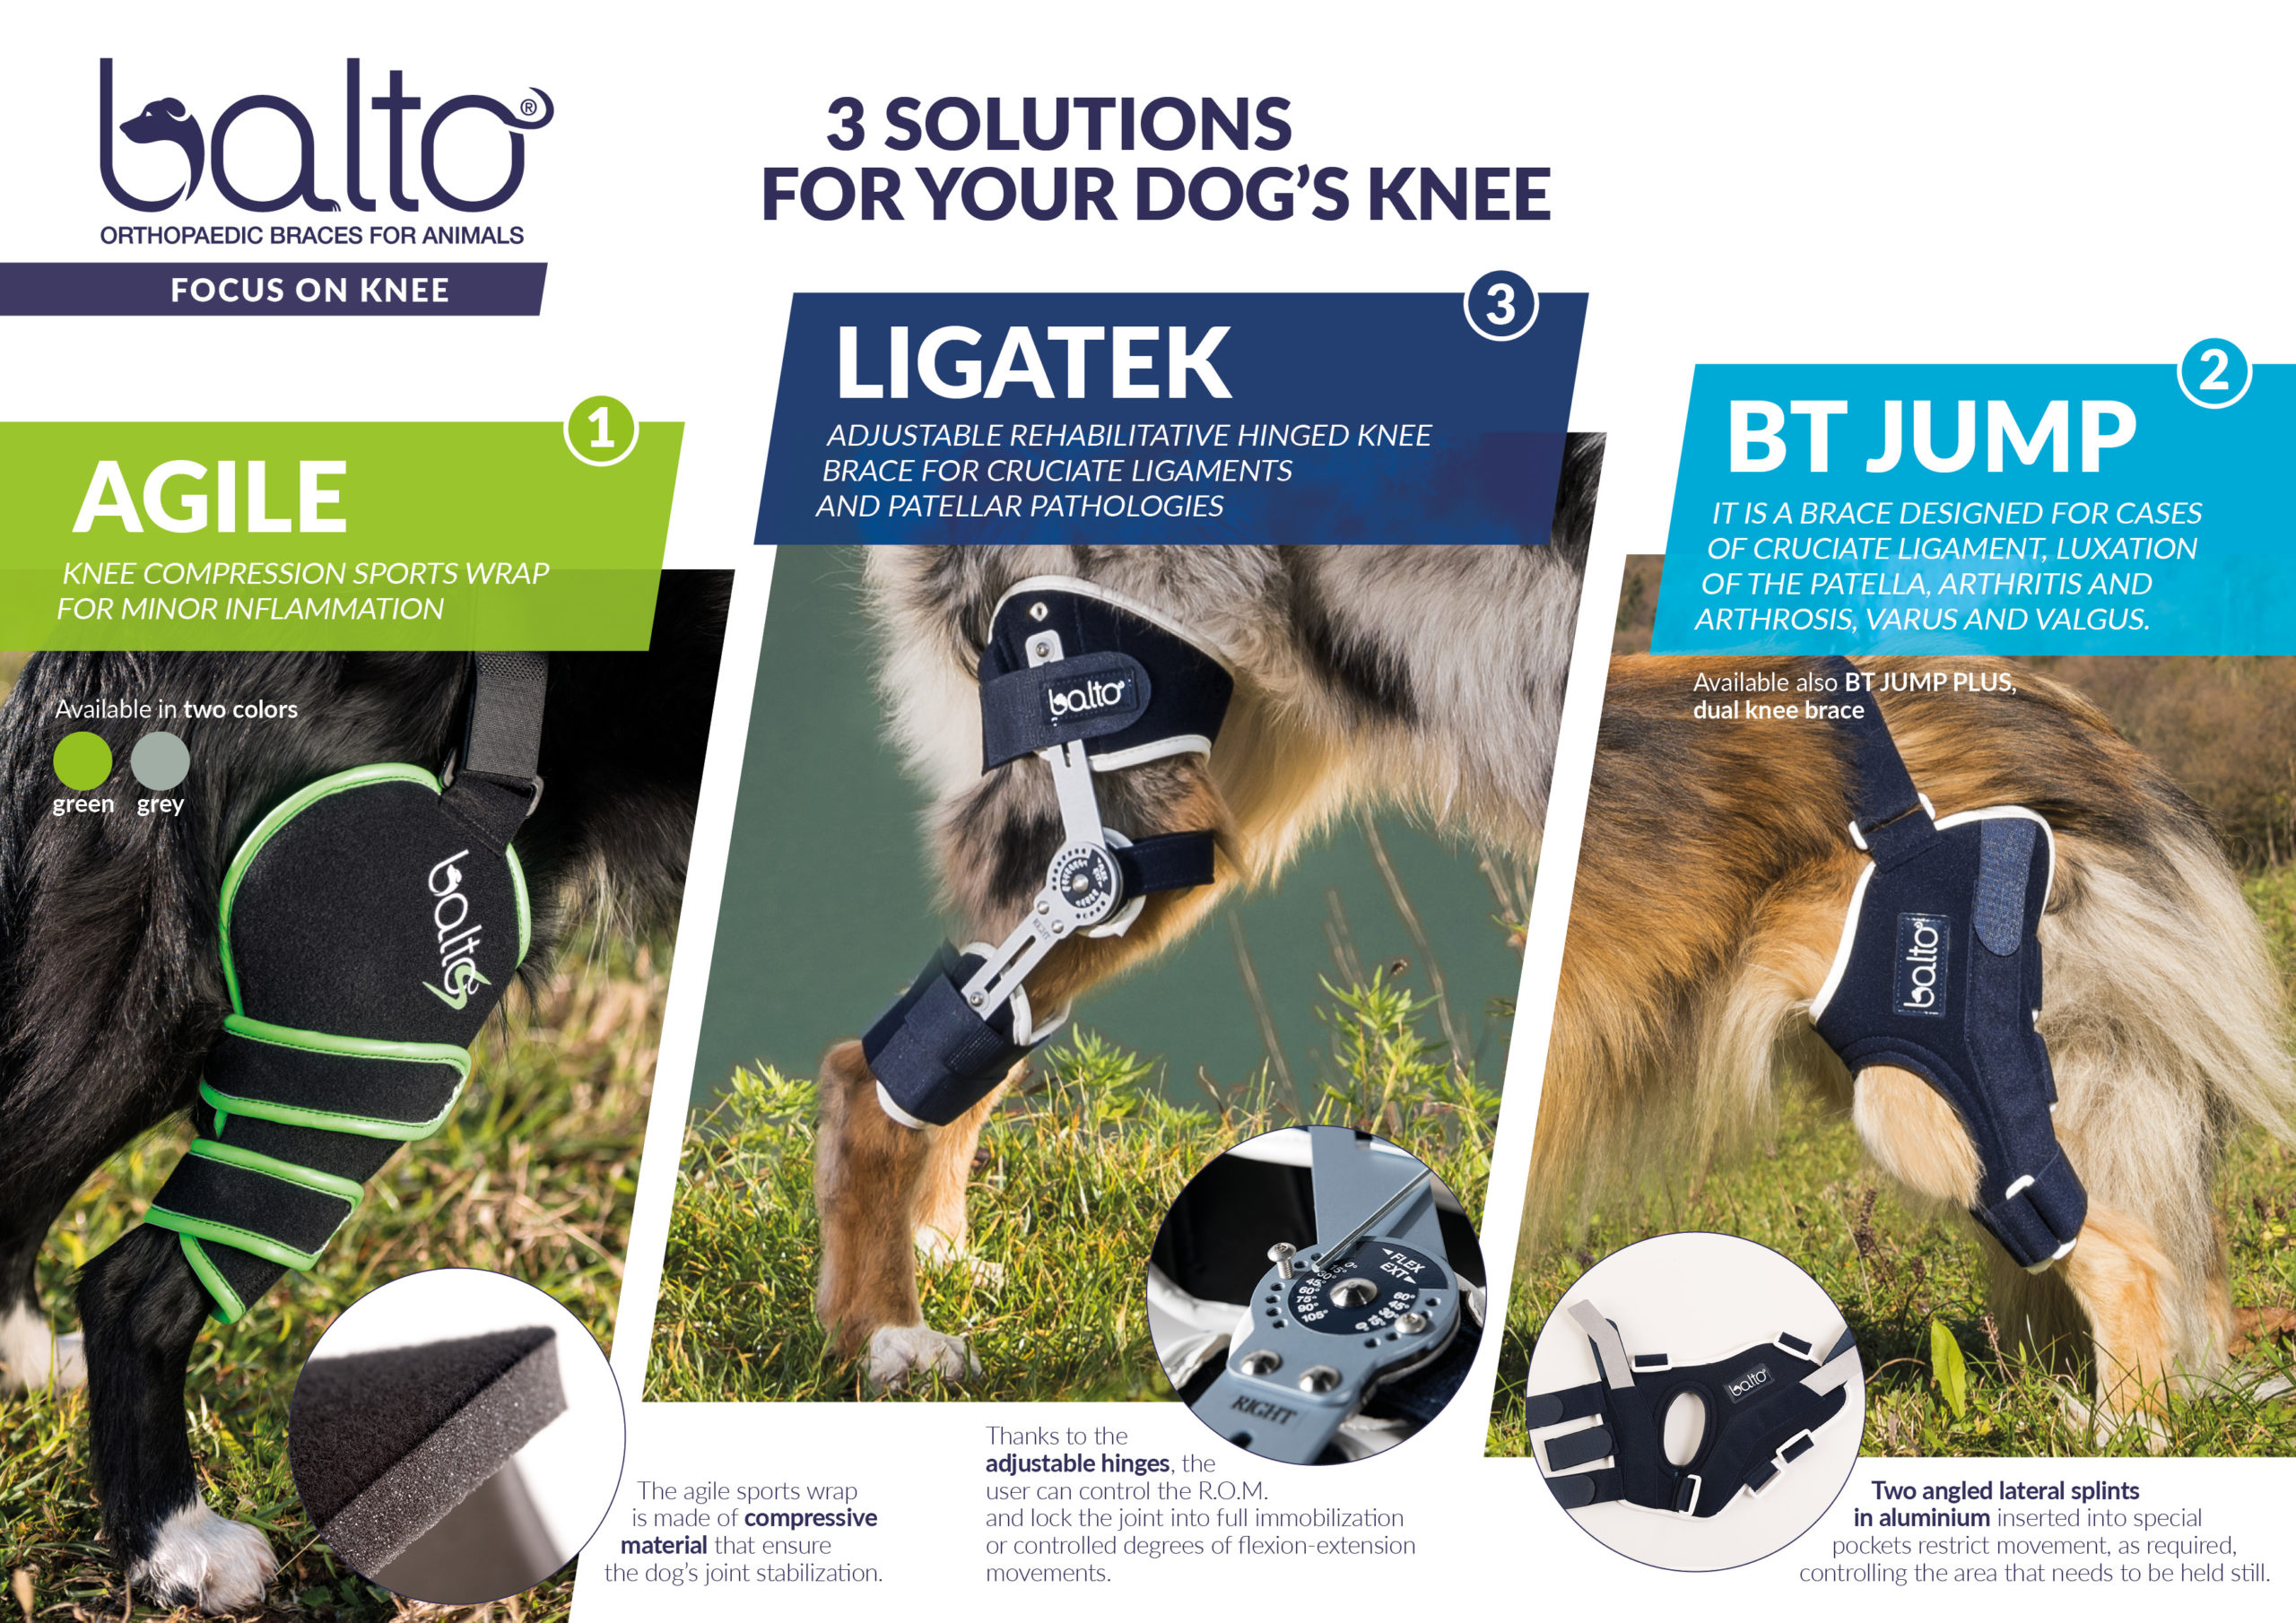 ACL, Cruciate ligament, knee brace for dogs